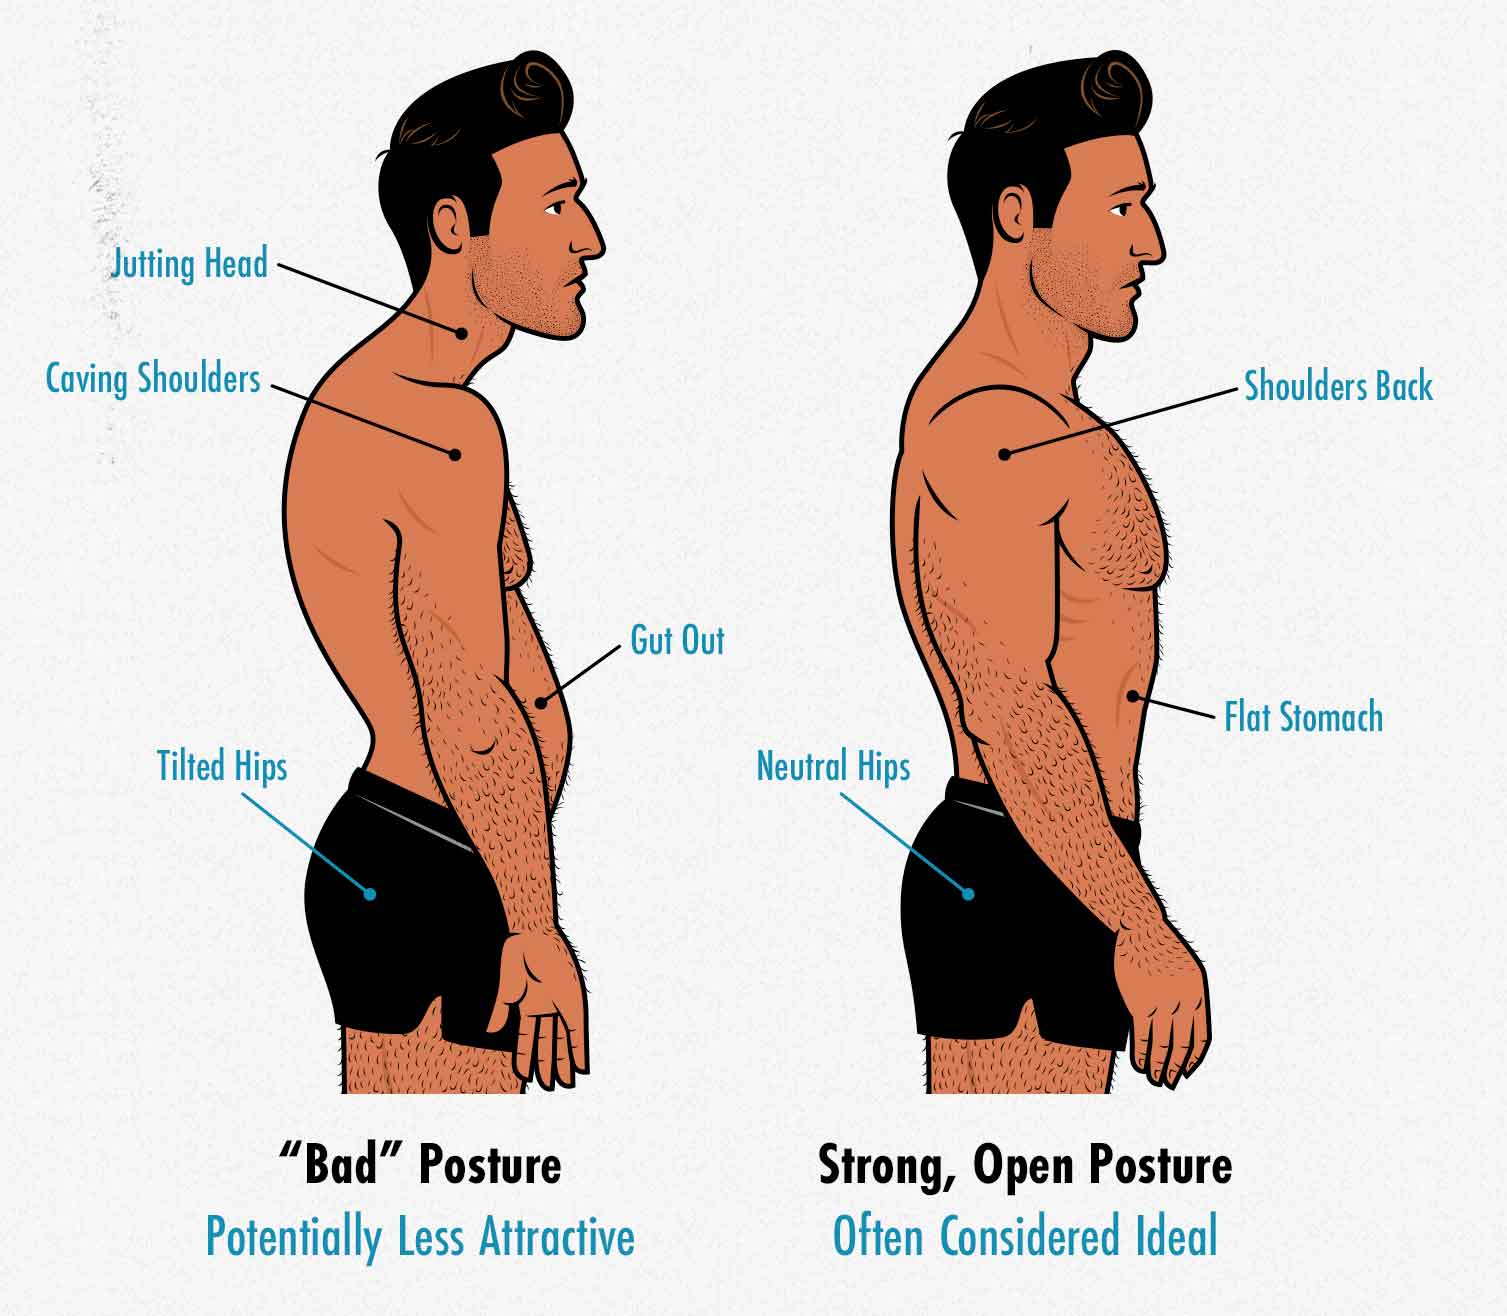 Ideal Male Posture for Aesthetics